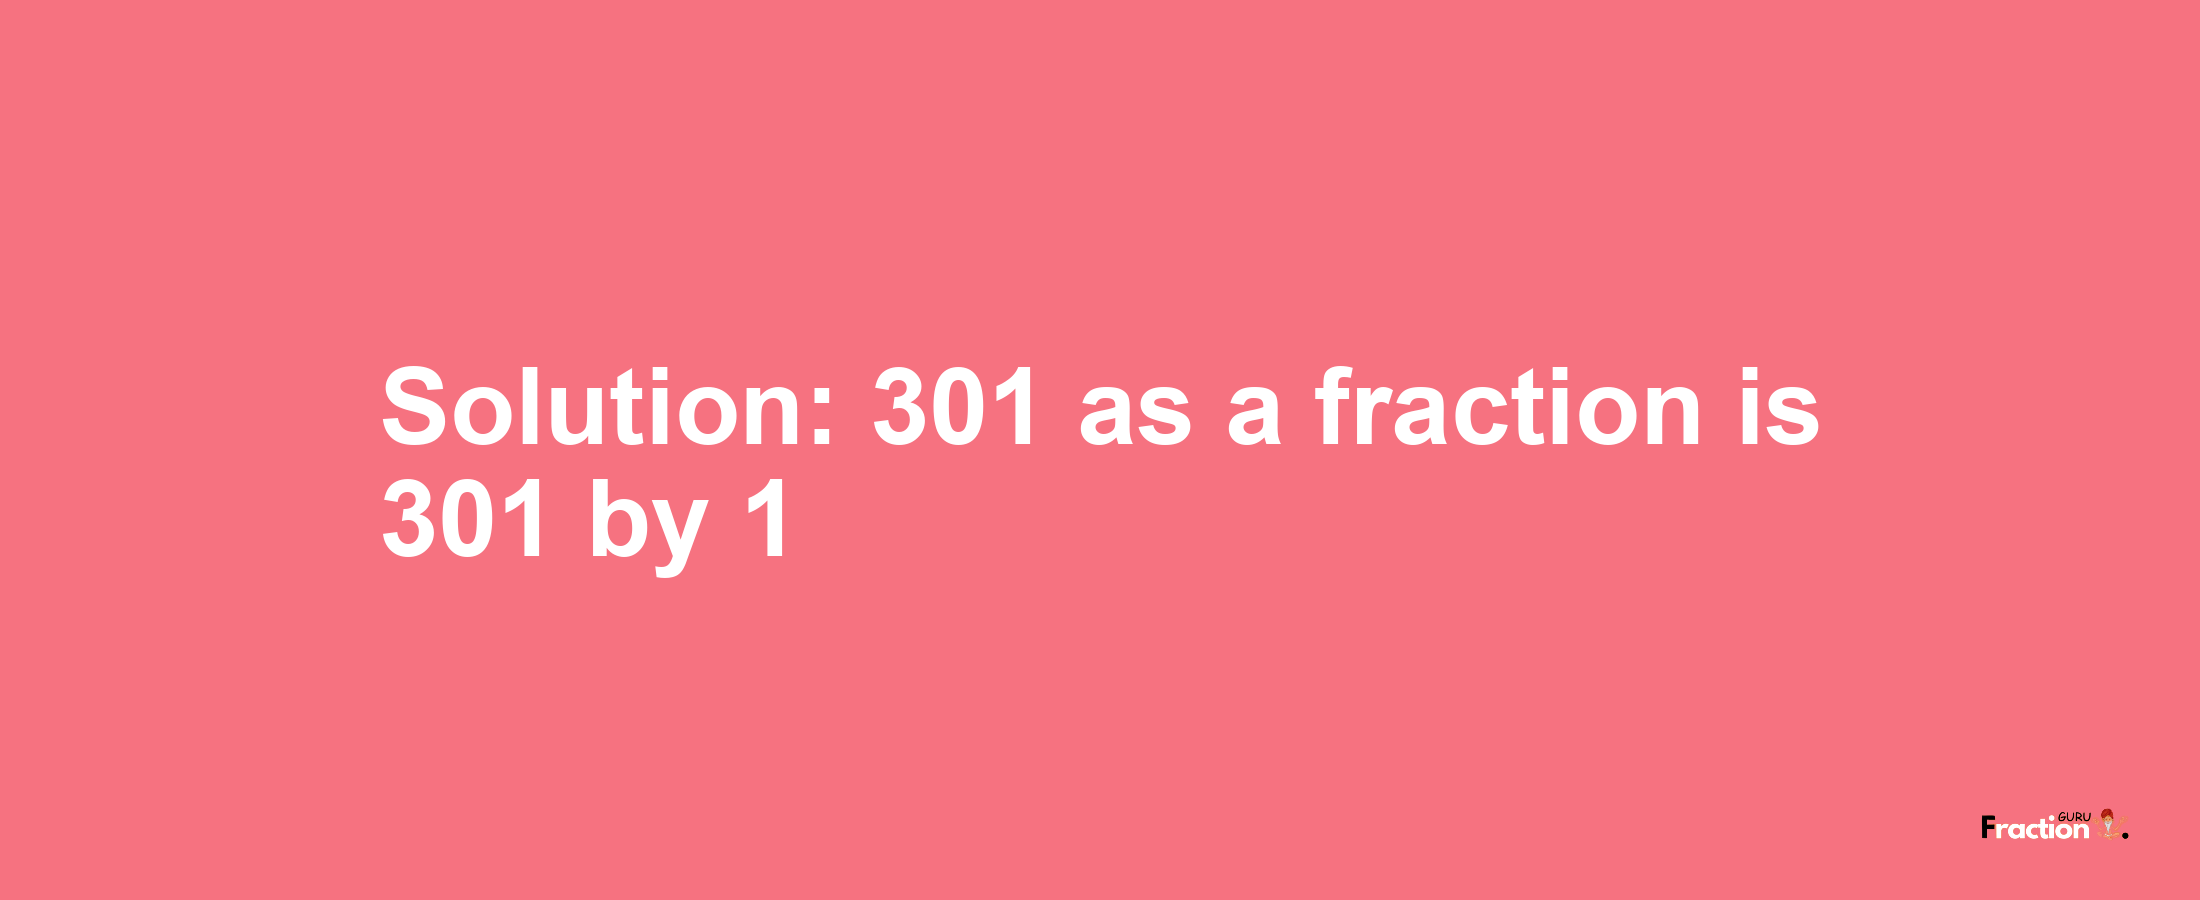 Solution:301 as a fraction is 301/1